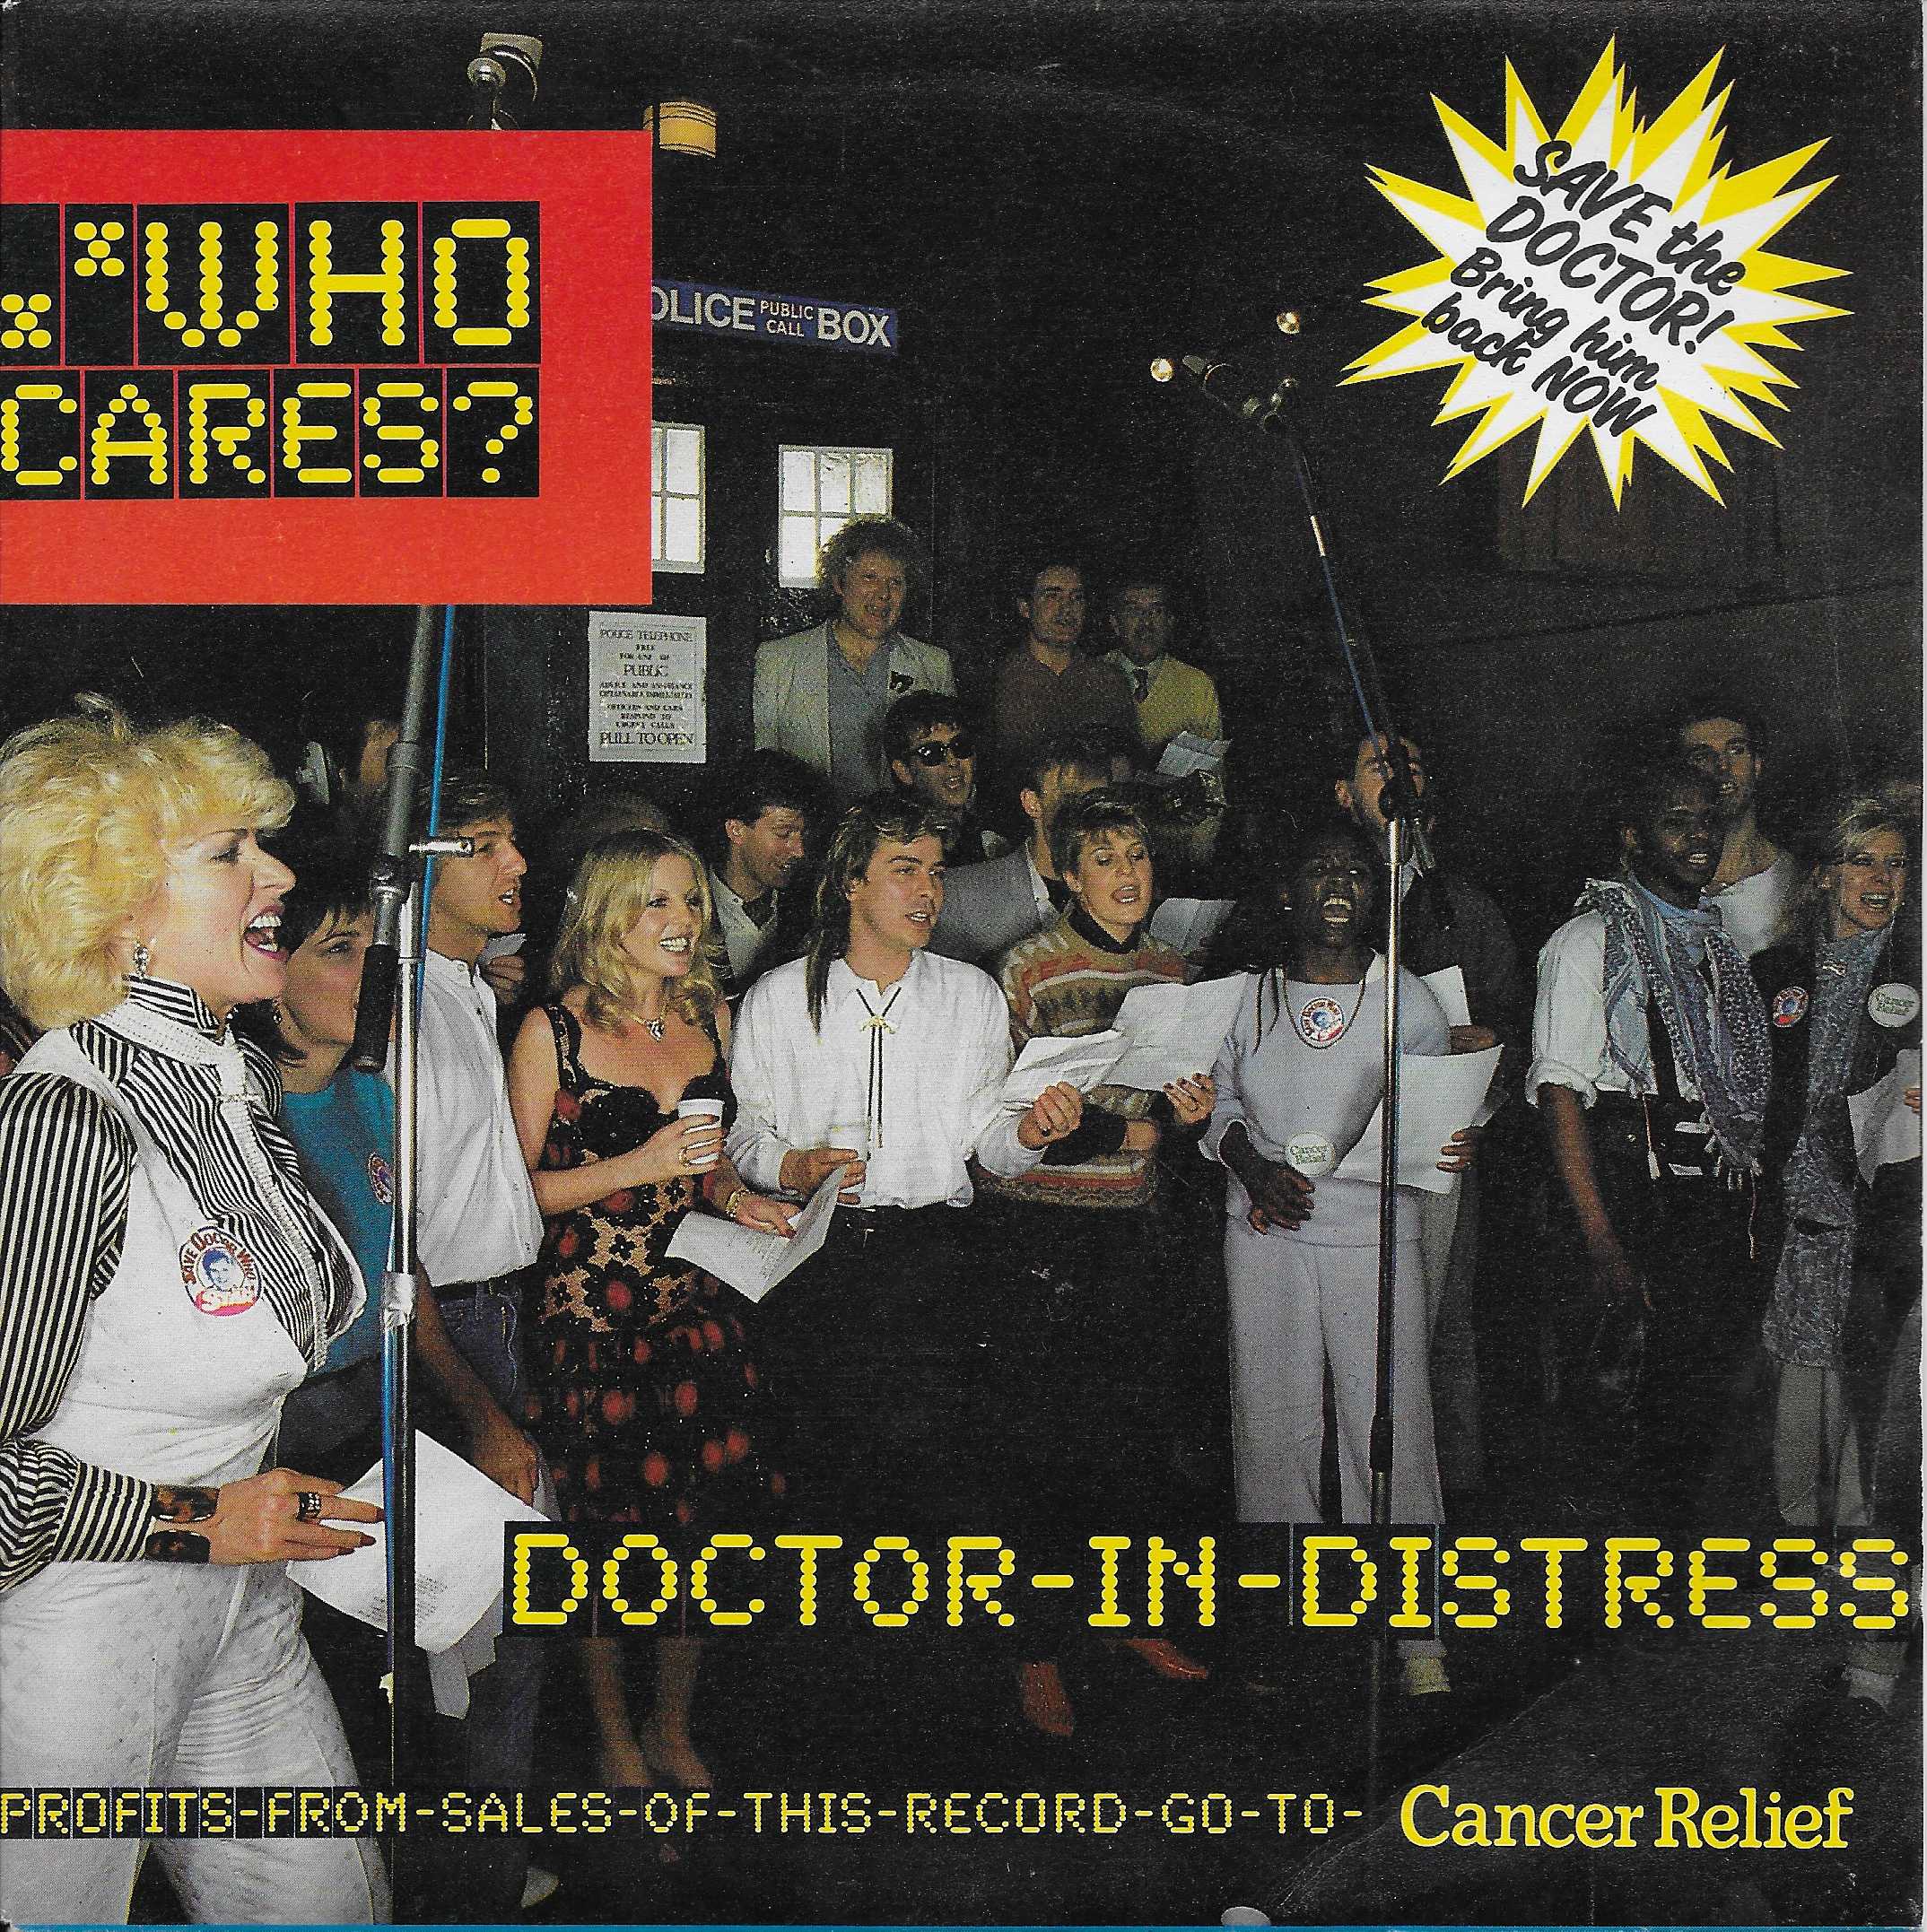 Picture of DOC 1 Doctor in distress by artist Ian Levine / Flachra Trench from the BBC singles - Records and Tapes library